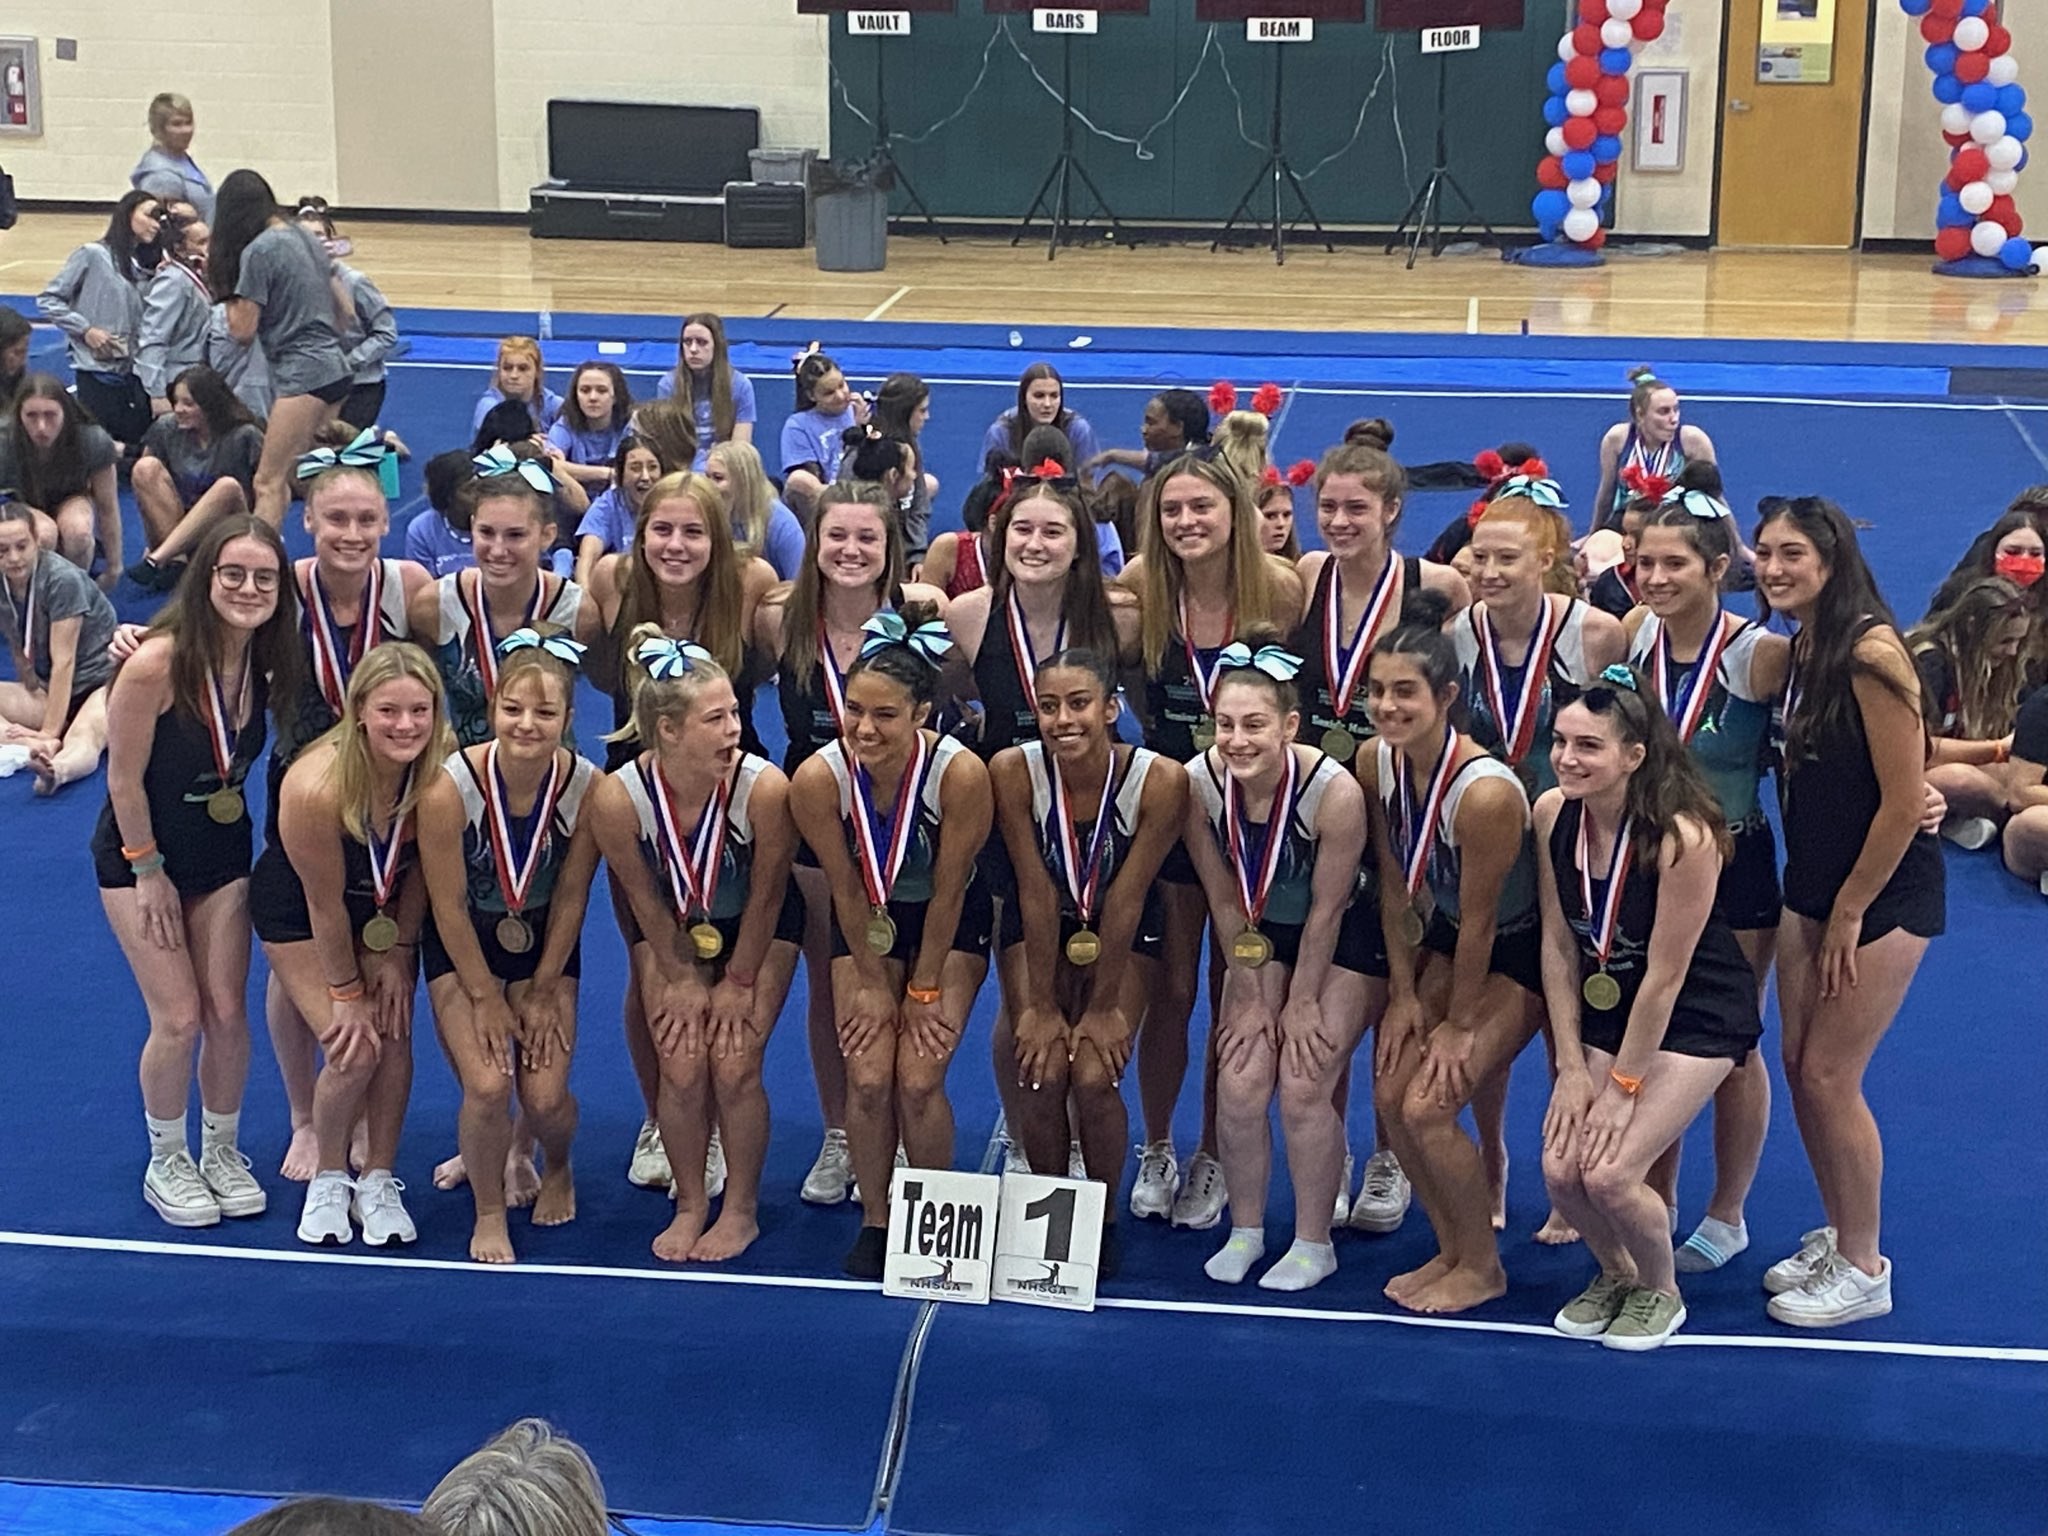 FHS' Rudolph, Brown, and Woelfel help MA take 1st place at Senior Gymnastics Nationals